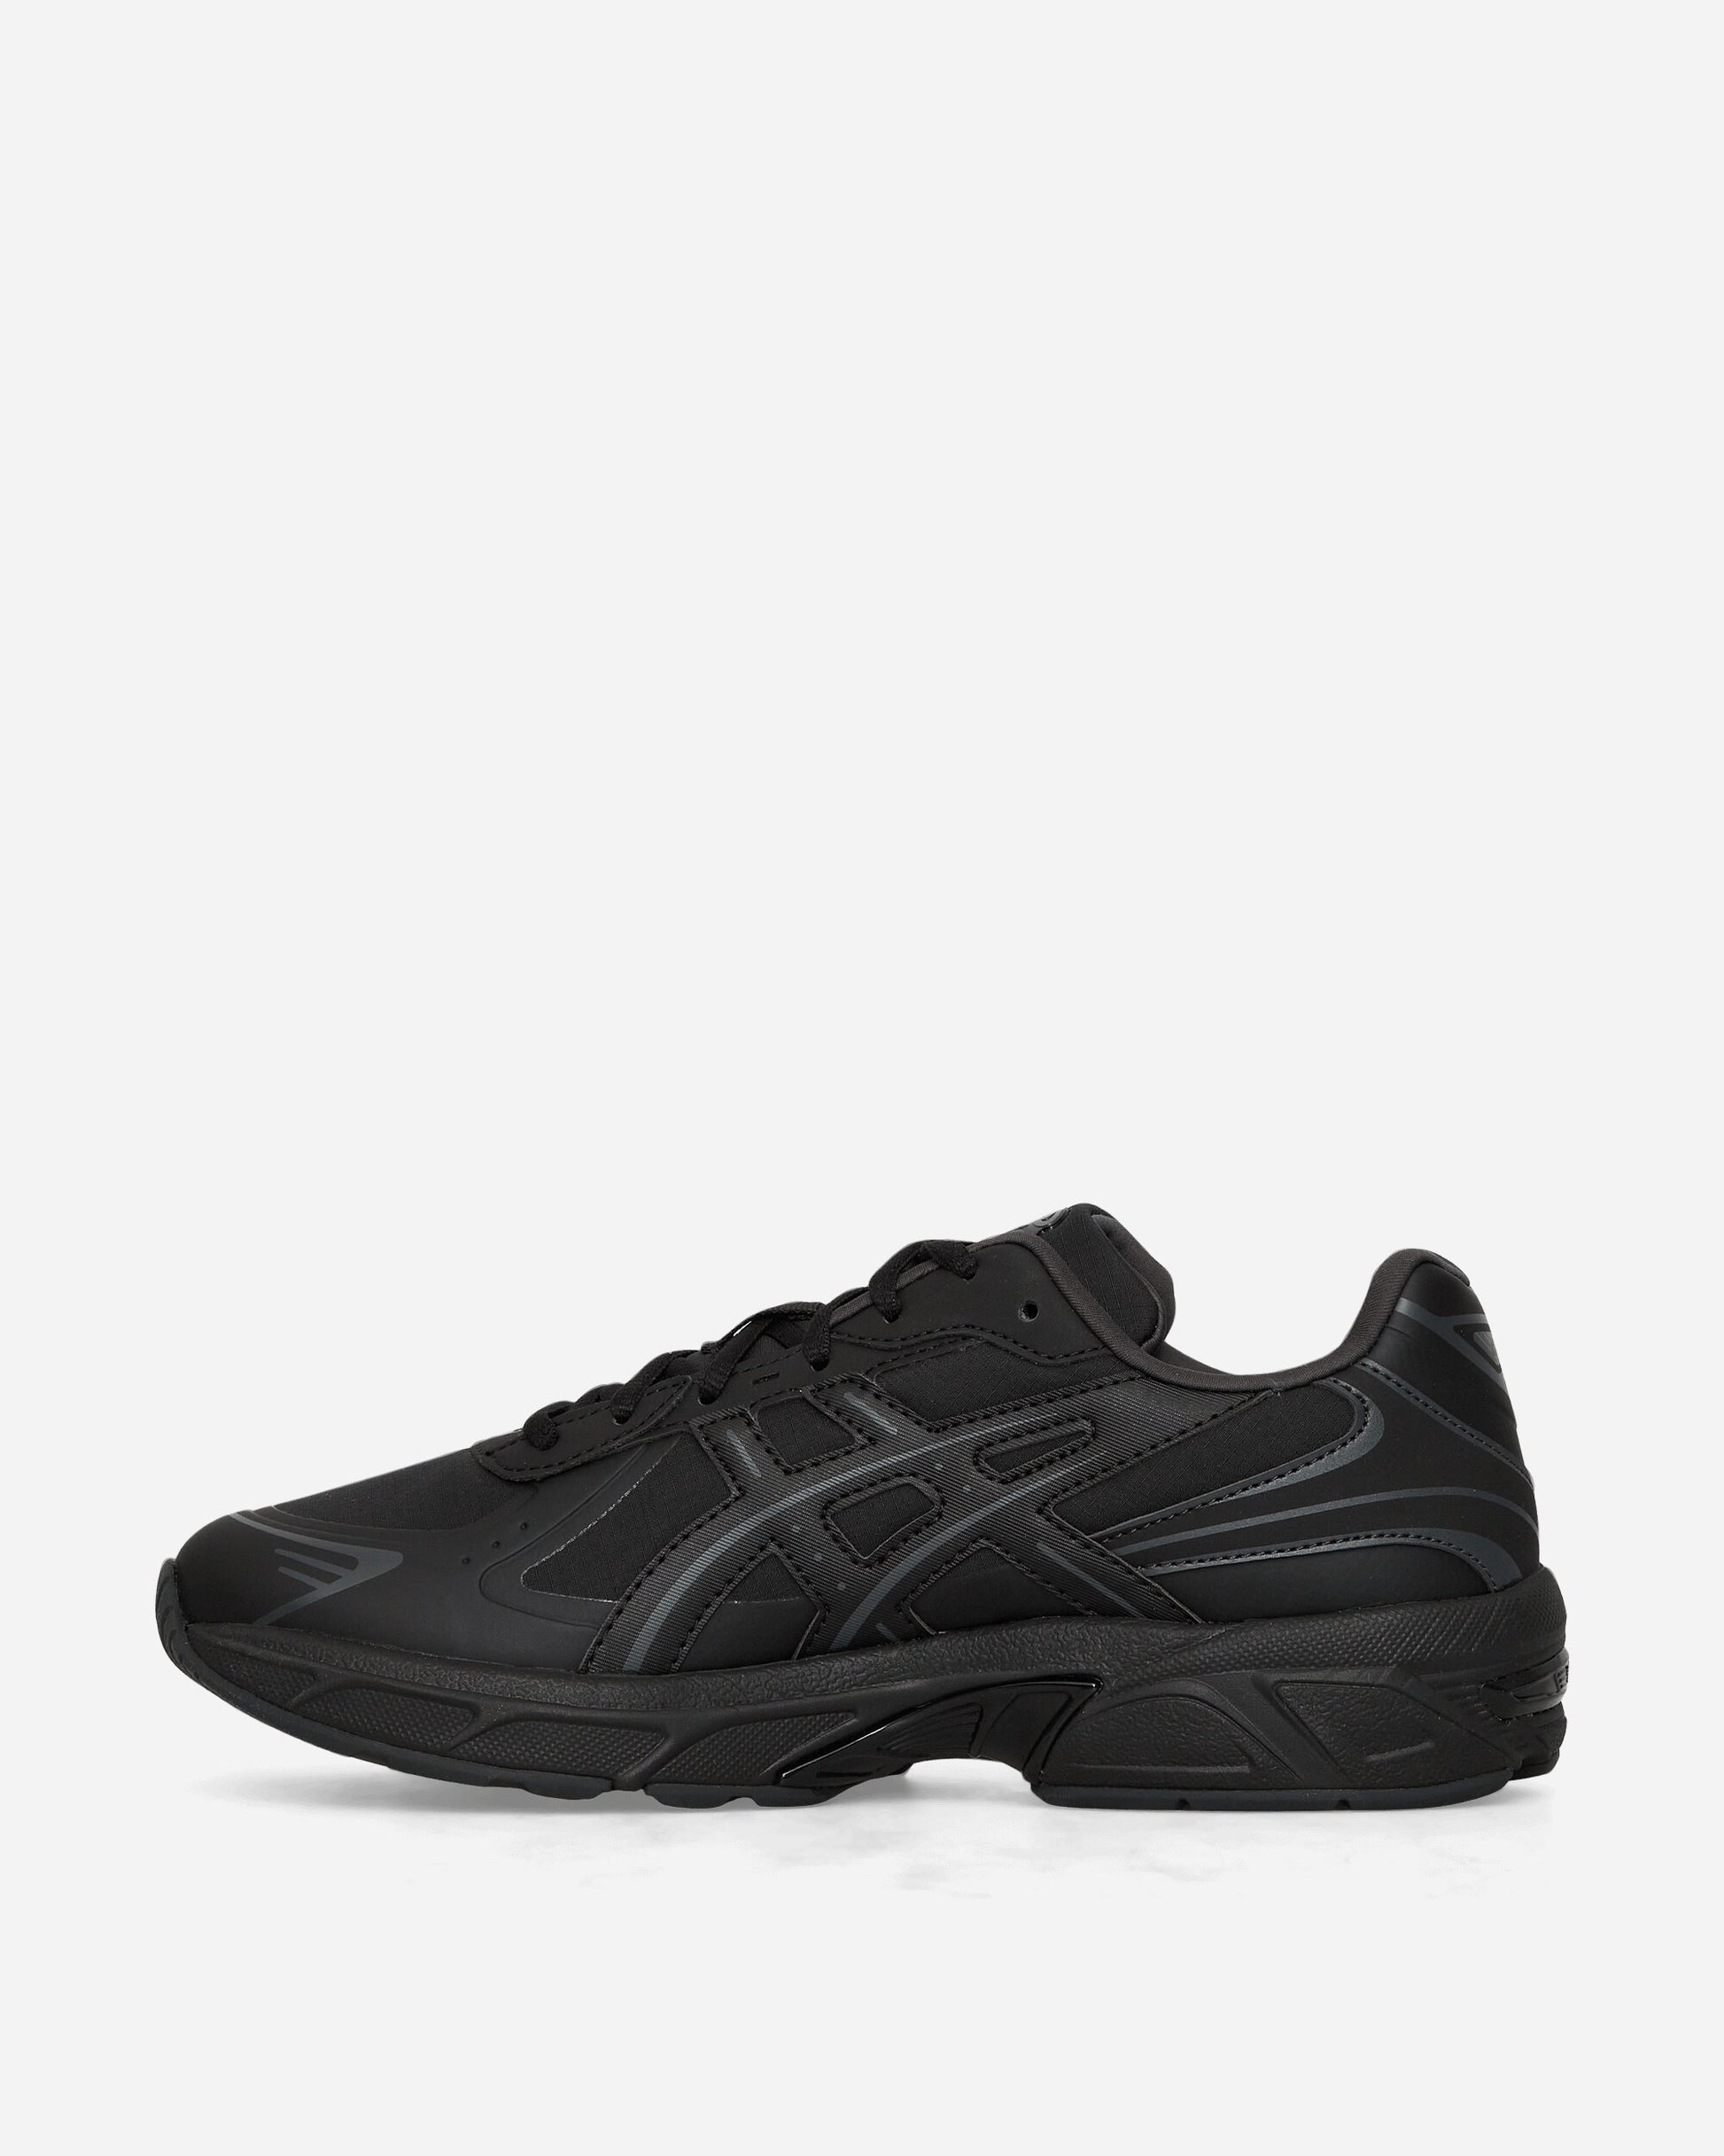 Asics Gel-1130 Ns Black/Graphite Grey Sneakers Low 1203A413-001